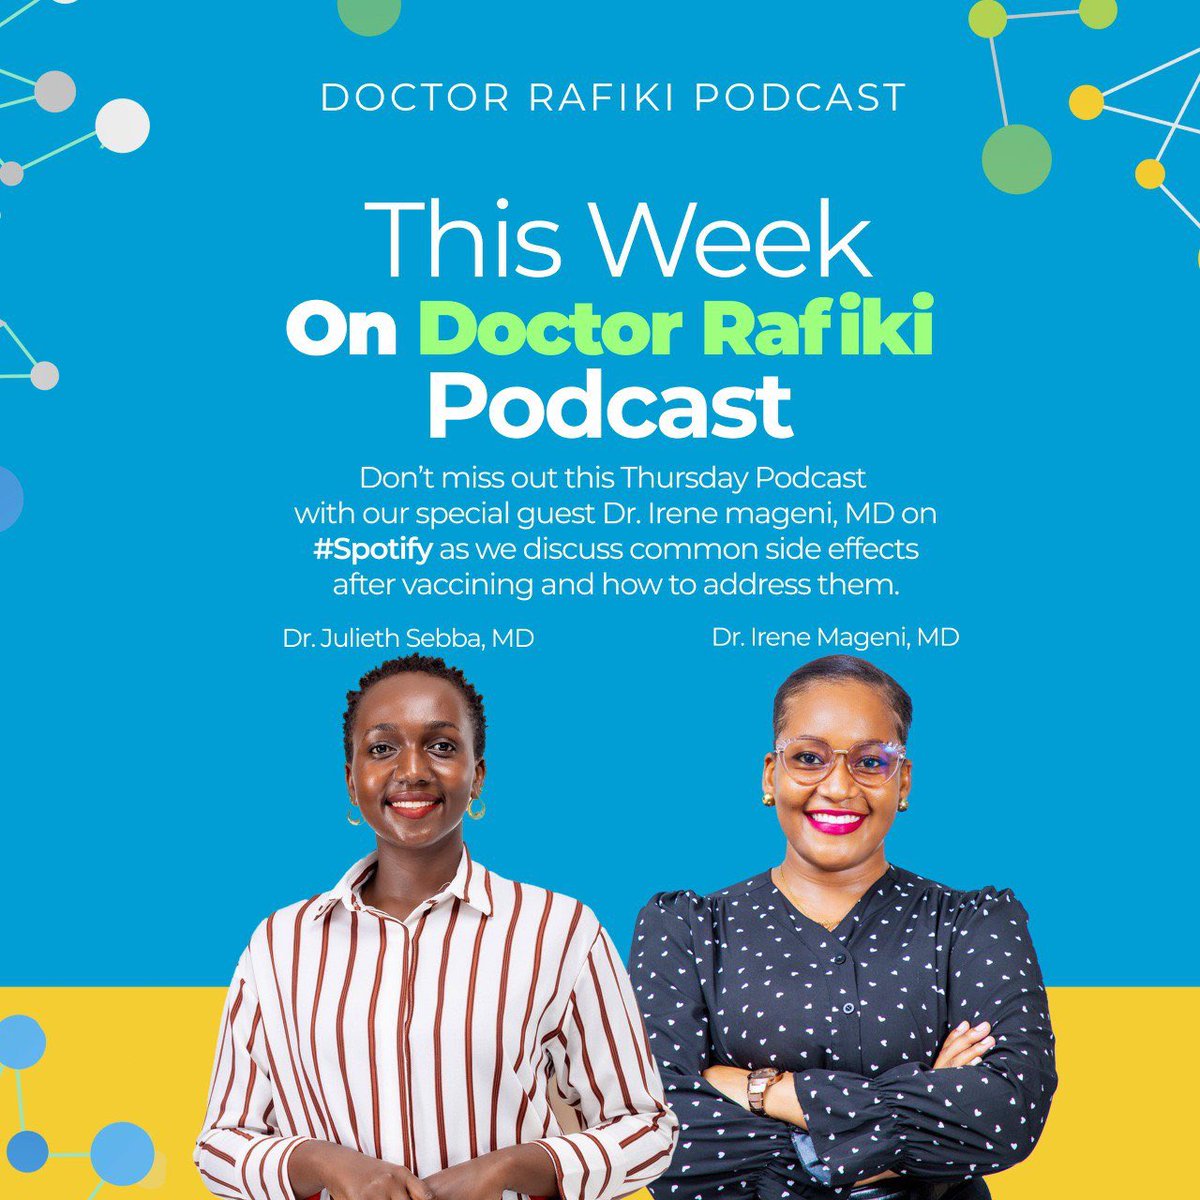 This Thursday on @DoctorRafiki podacast we’ll have Dr. Irene Mageni, MD and together we’ll dive in a discussion addressing common vaccine side effects on children and how to address them. You don’t want miss this! Episode will be out tomorrow